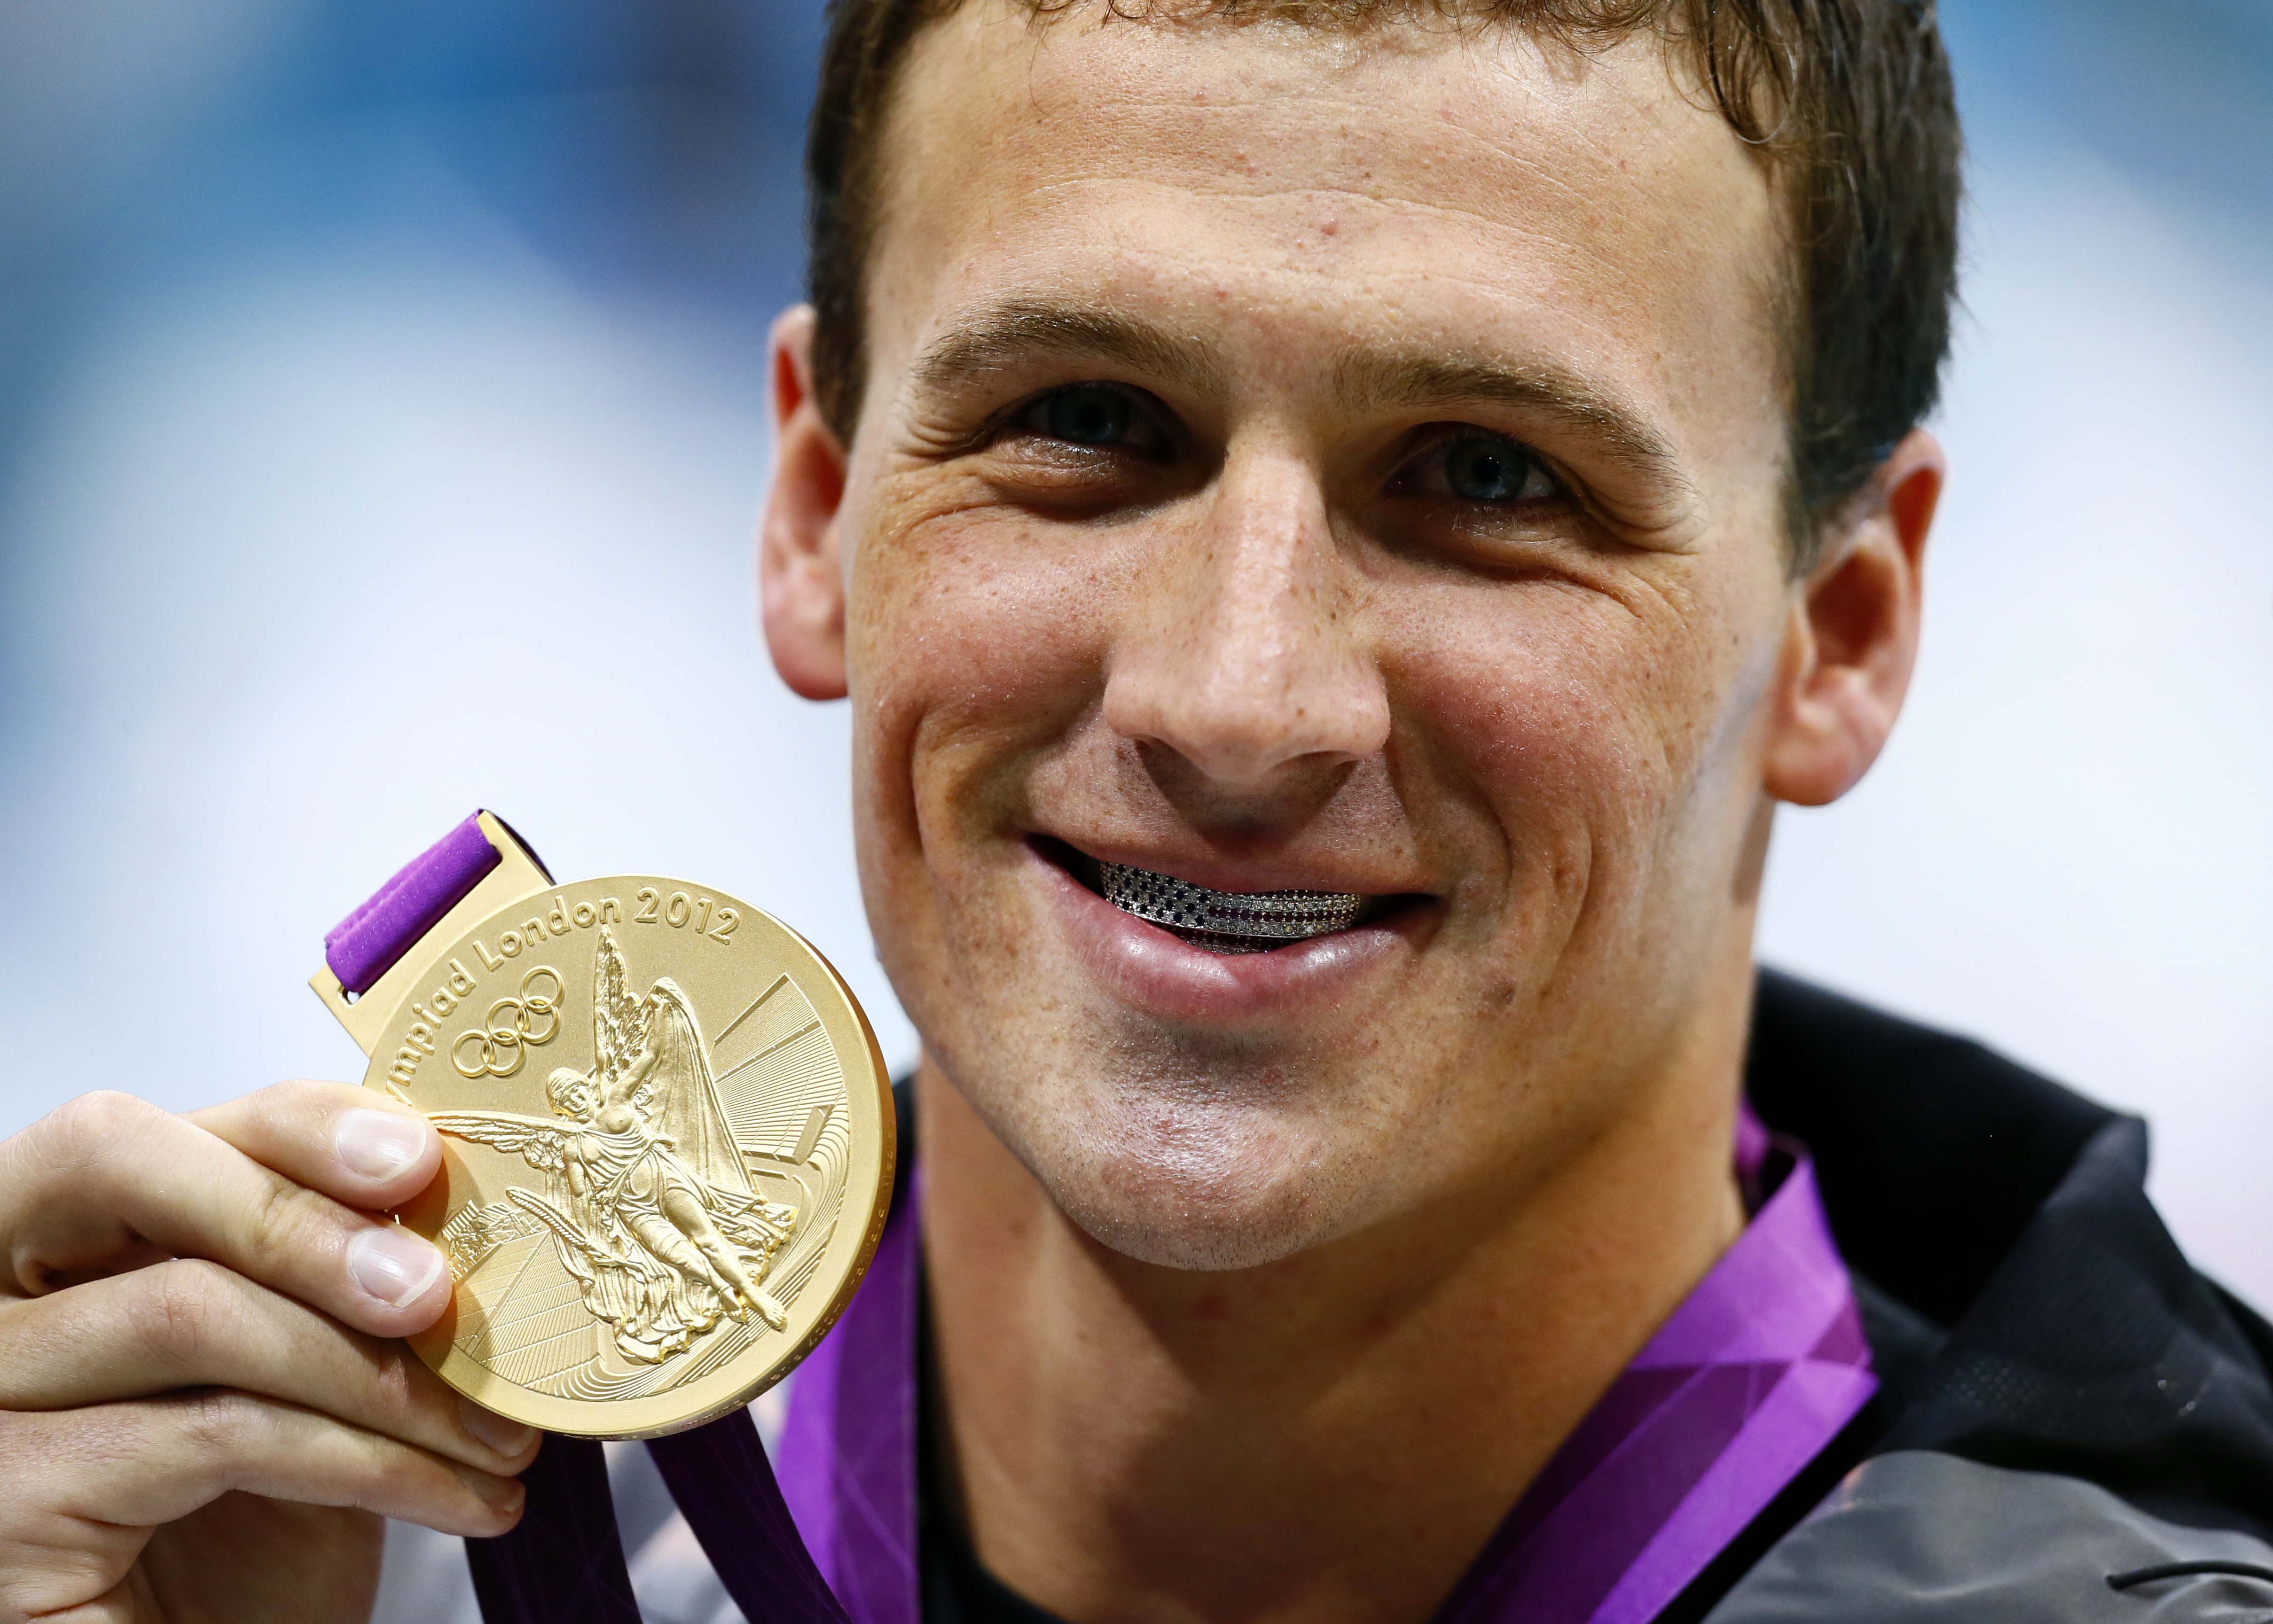 FYI *** THIS IS A SATURDAY NIGHT GOLD MEDAL *** ORG XMIT: USPW-GRP-4 Jul 28, 2012; London, United Kingdom; Ryan Lochte (USA) poses with his gold medal after winning the 400m individual medley finals during the 2012 London Olympic Games at Aquatics Centre. Mandatory Credit: Rob Schumacher-USA TODAY Sports ORIG FILE ID: 20120728_jel_usa_106.jpg